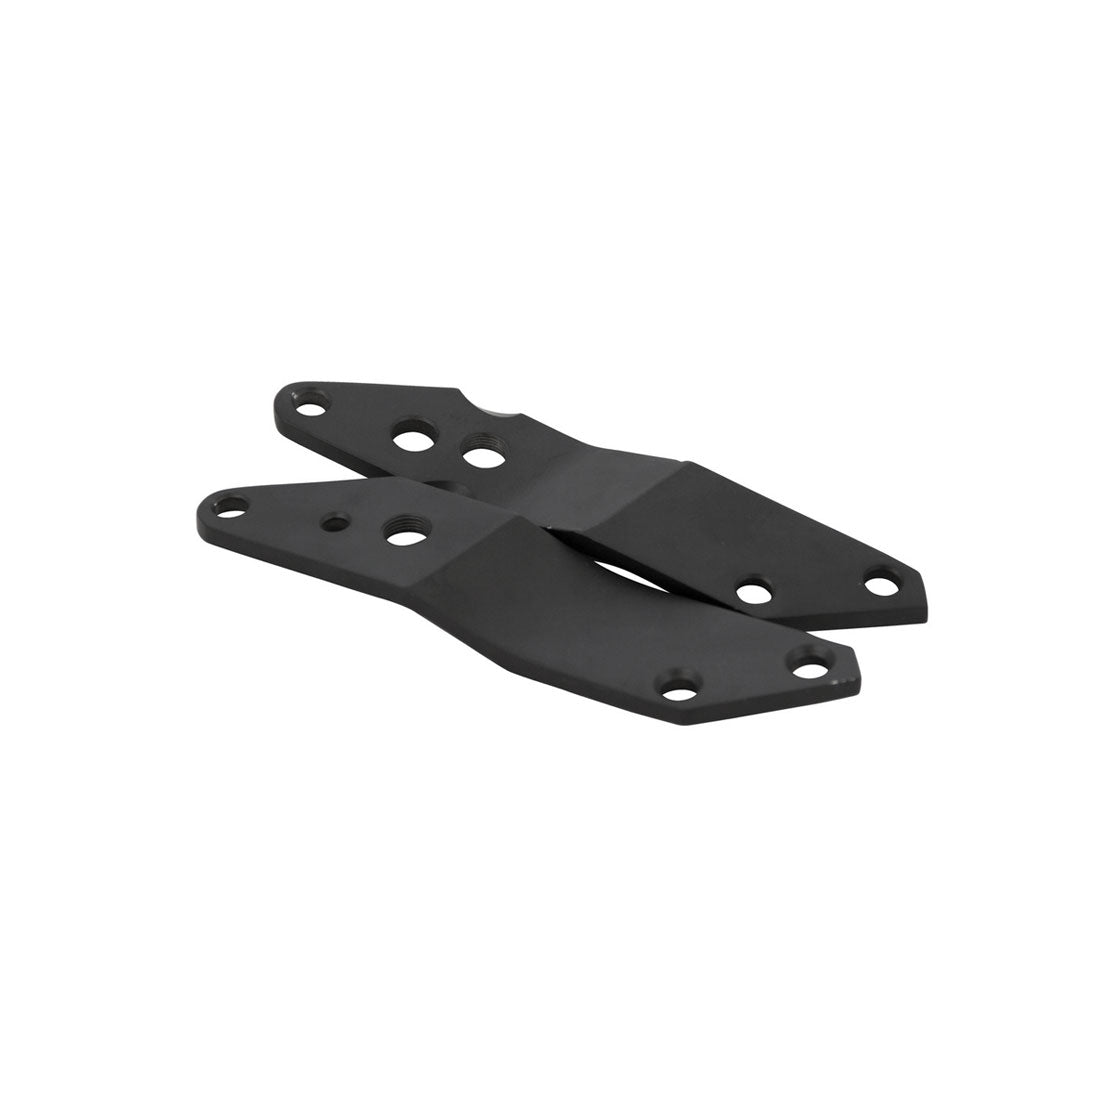 Micro Sprite Holder Plates L&amp;R Black - 1368 Scooter Hardware and Parts